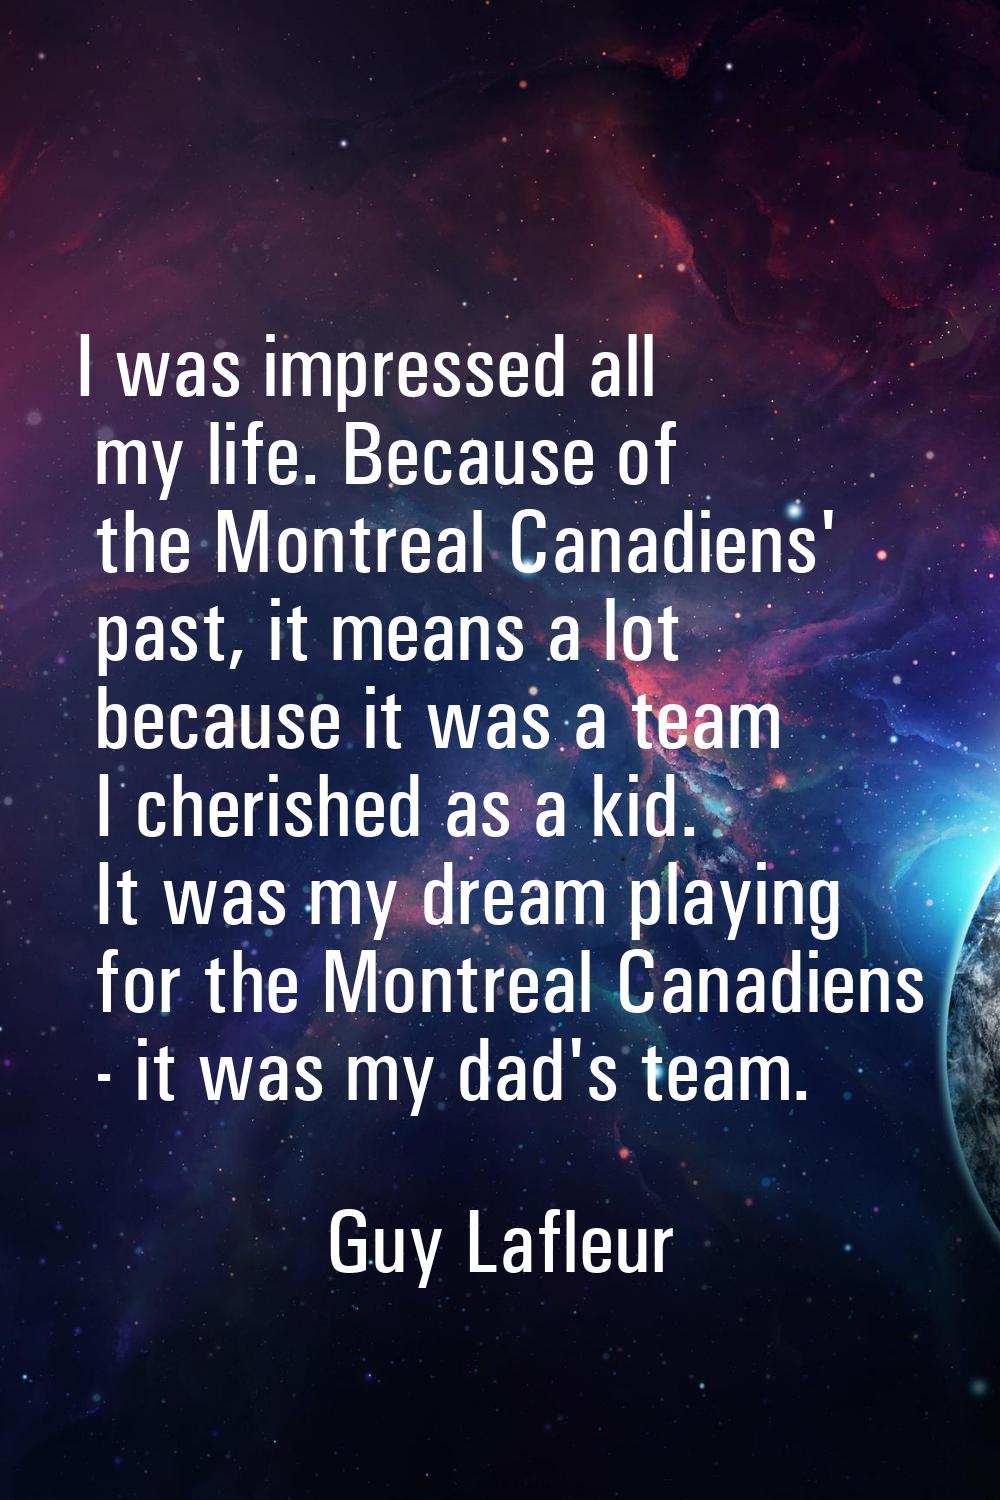 I was impressed all my life. Because of the Montreal Canadiens' past, it means a lot because it was